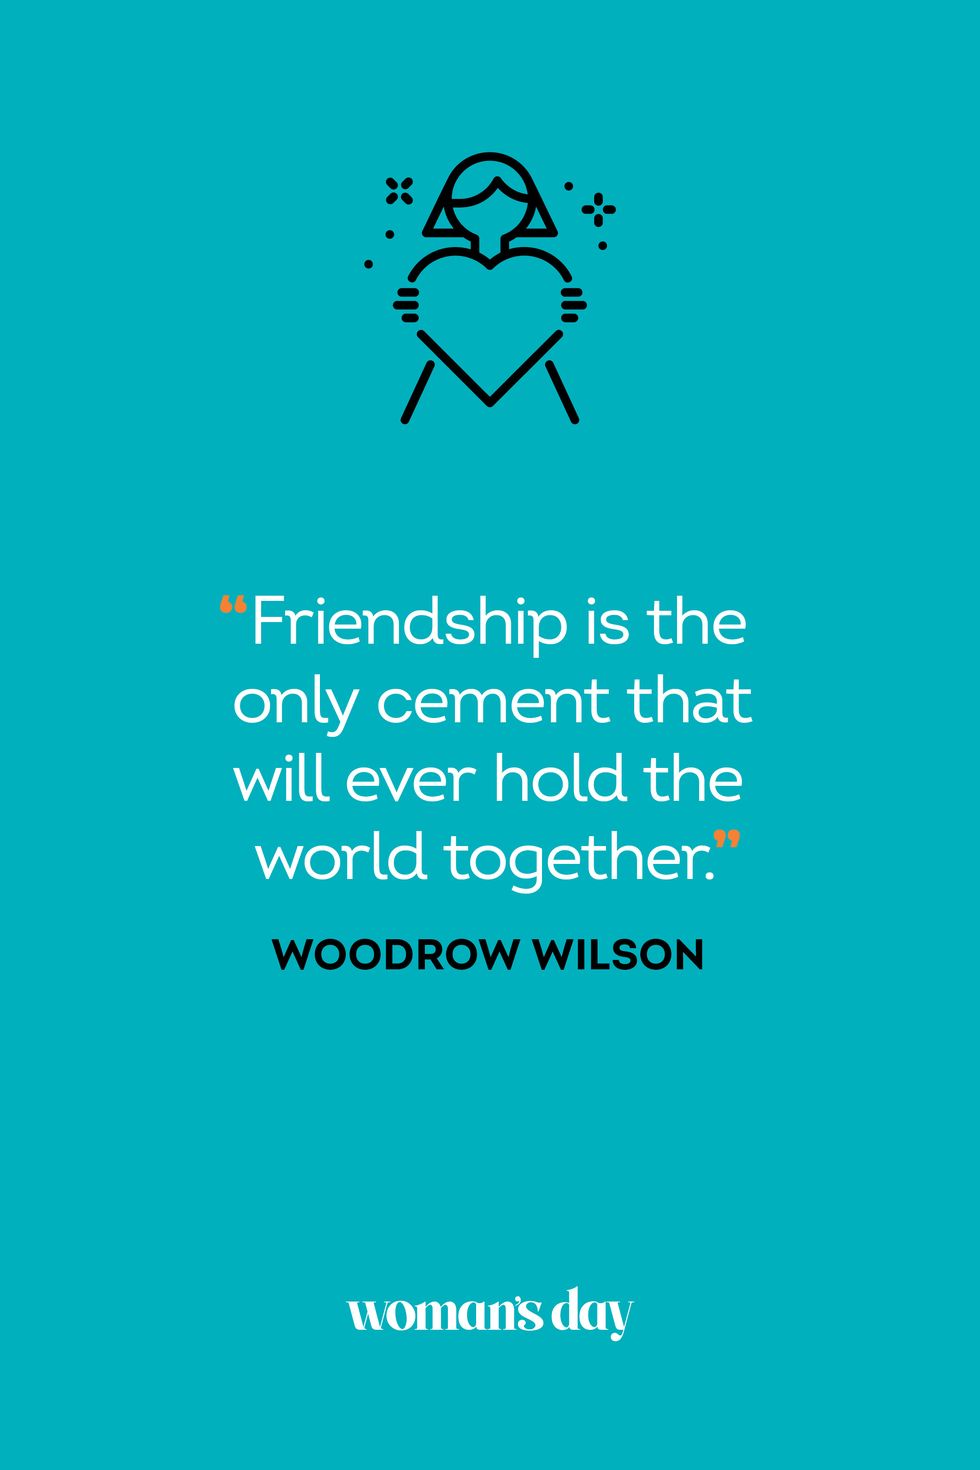 100 Best Friendship Quotes: Short, Meaningful & Funny BFF Sayings